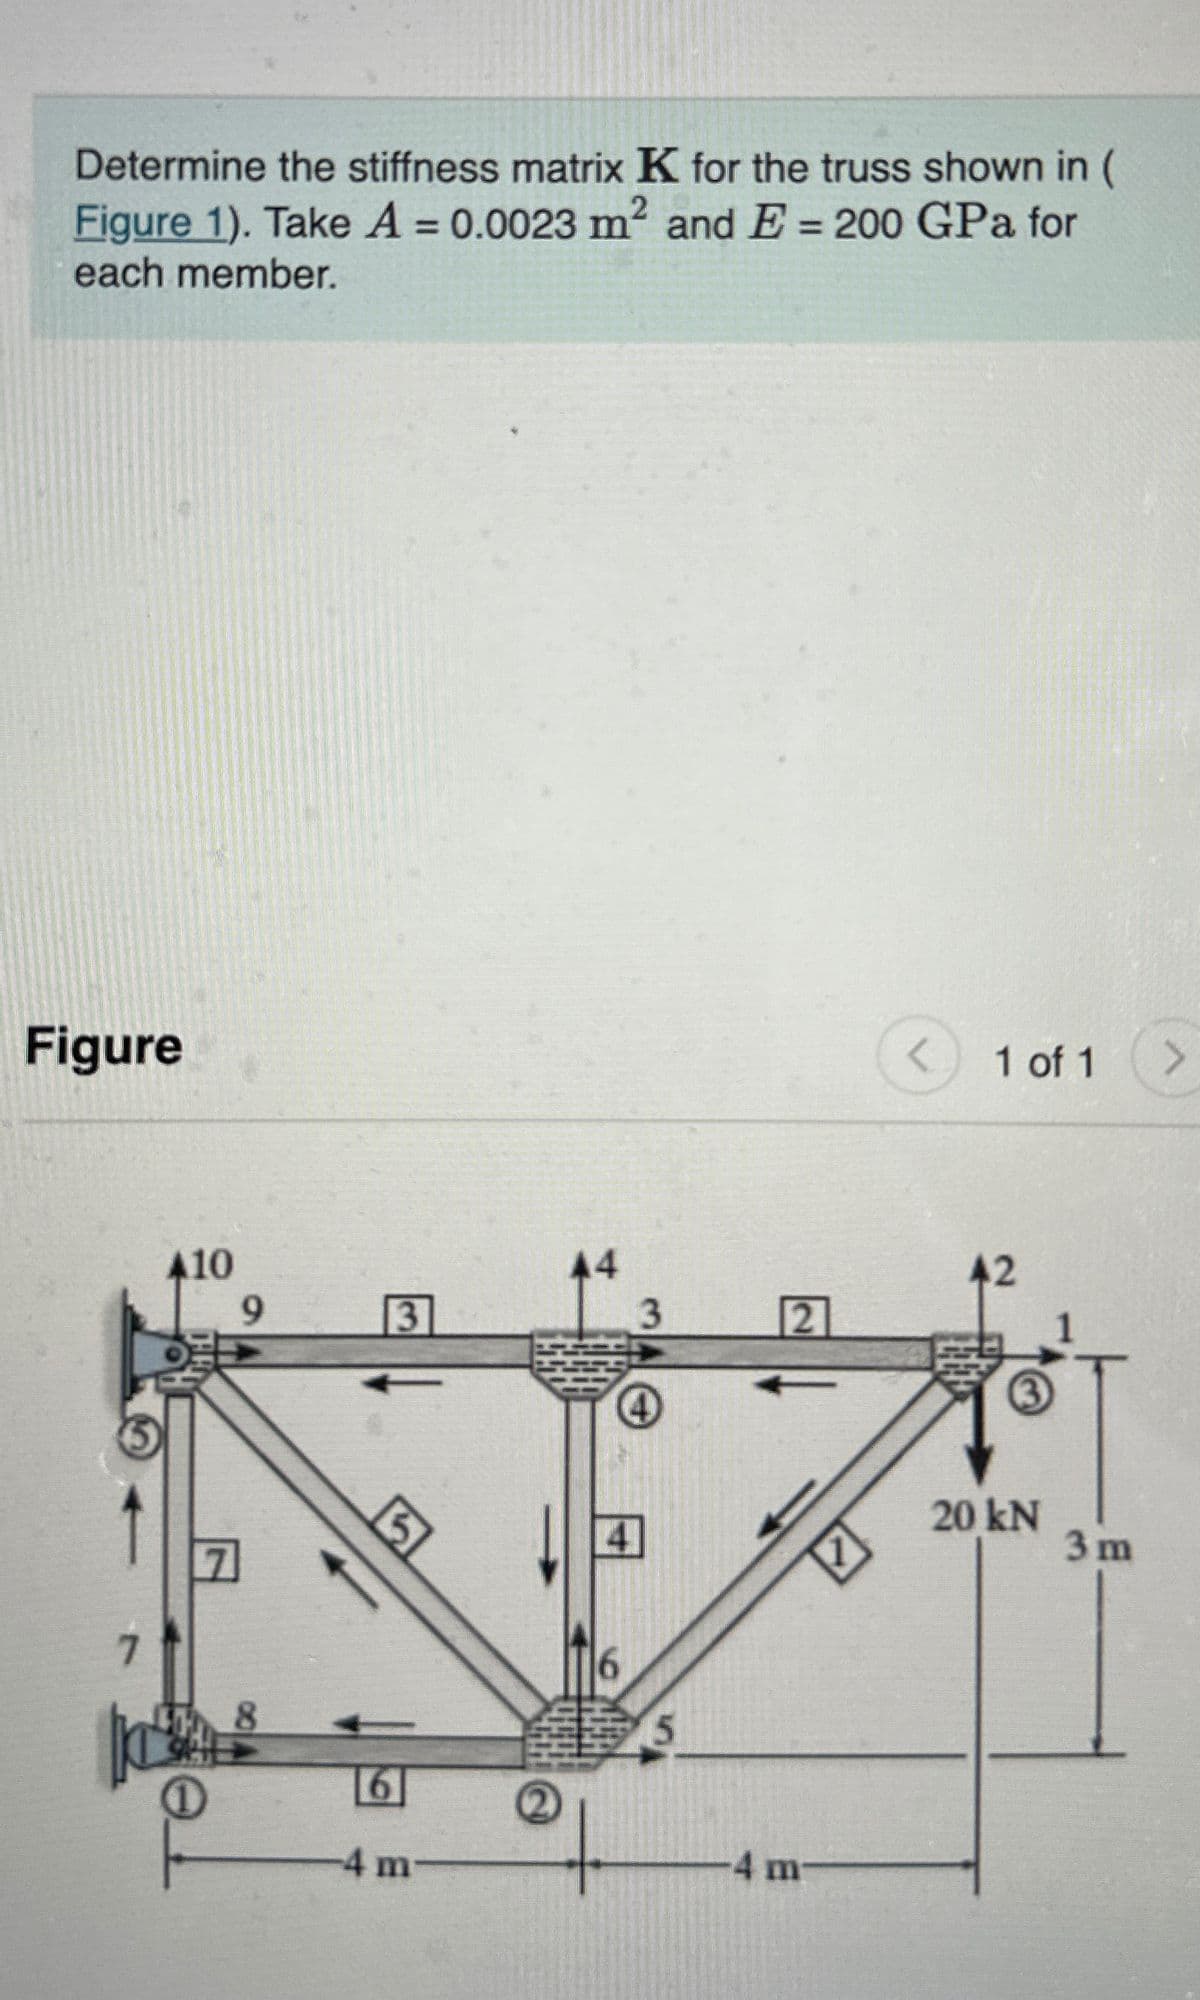 Determine the stiffness matrix K for the truss shown in
Figure 1). Take A = 0.0023 m² and E = 200 GPa for
each member.
2
Figure
A10
9
1 of 1 >
44
42
3
3
2
5
7
8
6
-4 m
5
4 m
20kN
3 m